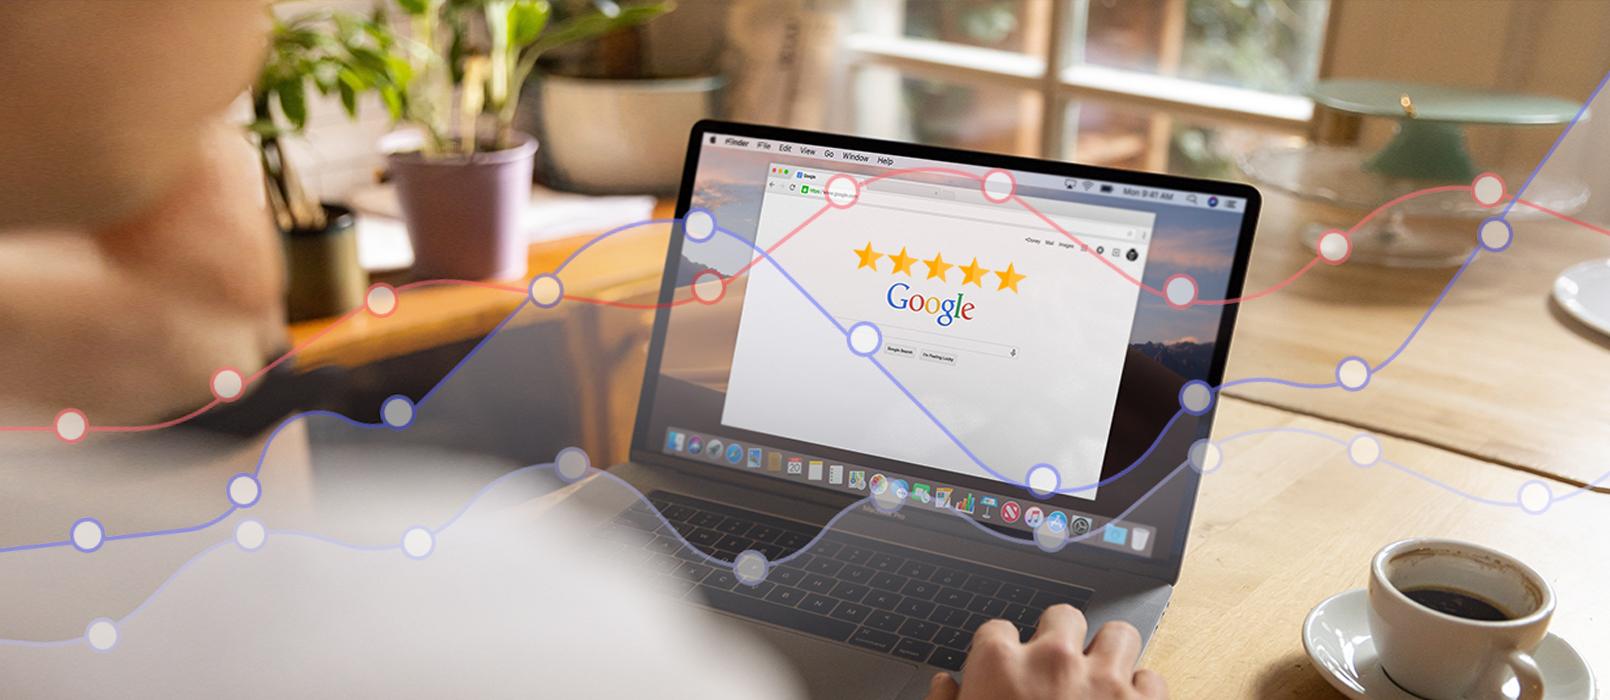 How to get star ratings in Google Search Result? A few words about Rich Snippets